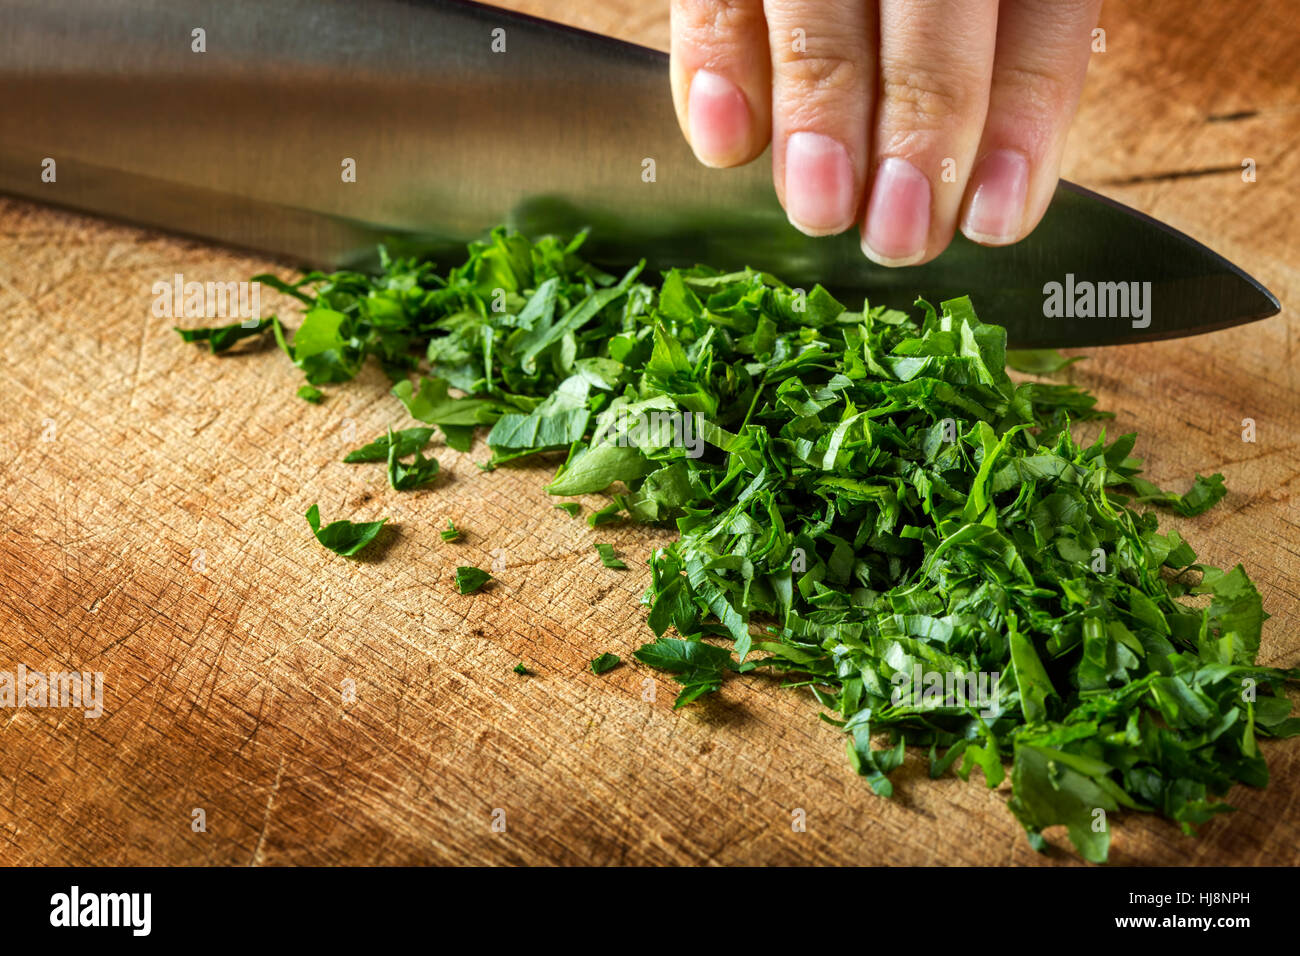 Woman hand cutting raw parsley on wooden cutting board background Stock Photo